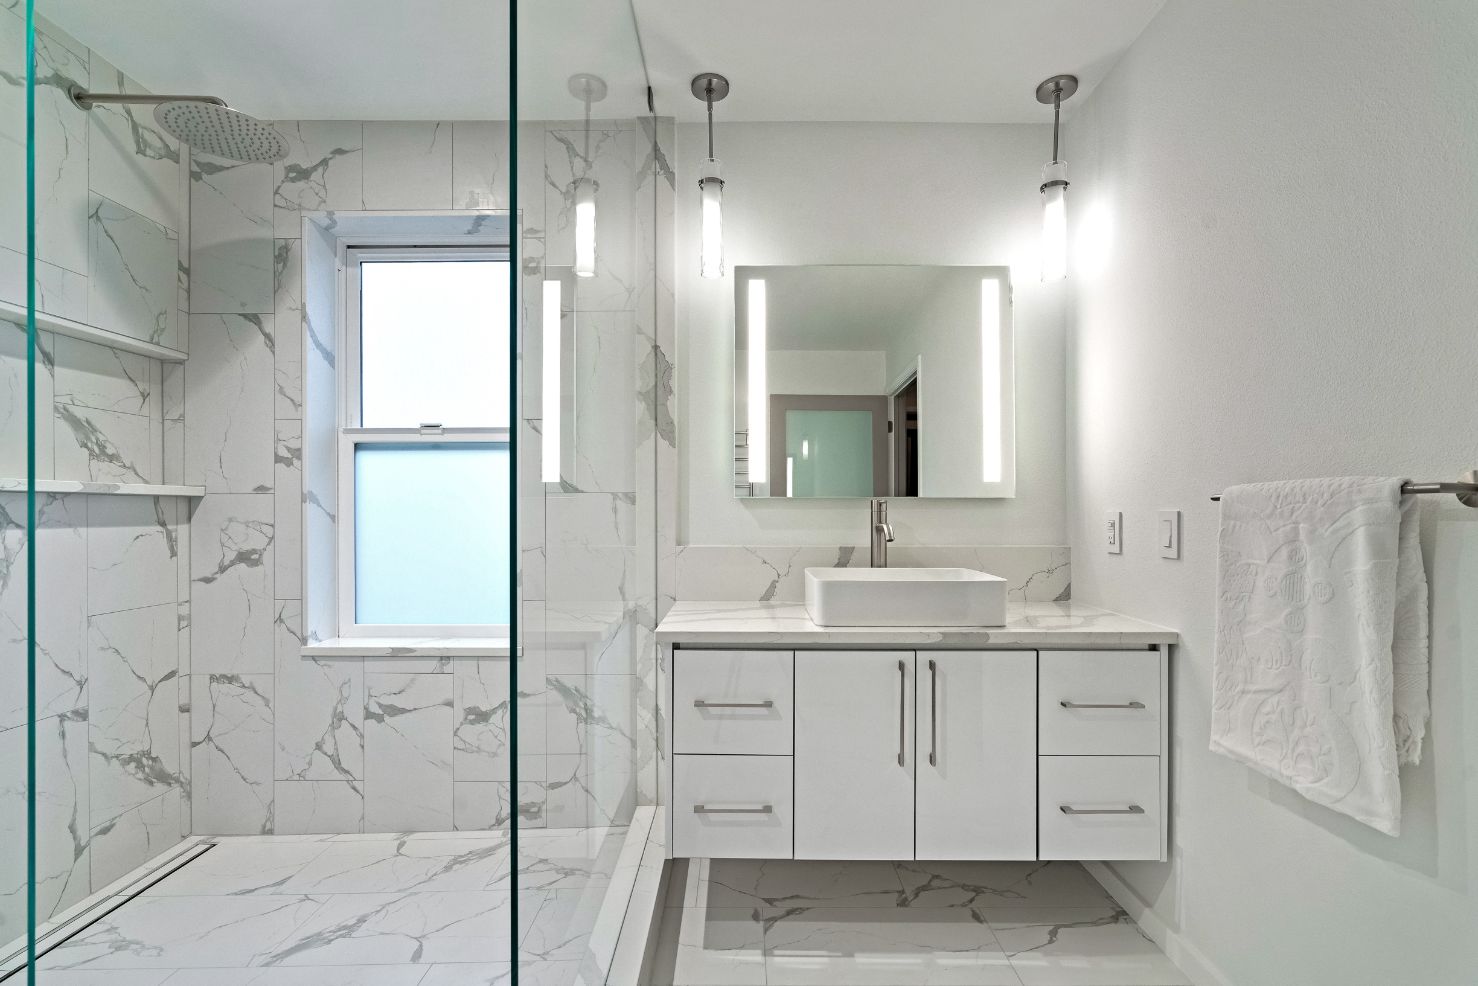 All-white bathroom remodel with large, marble shower and floating custom cabinets as vanity